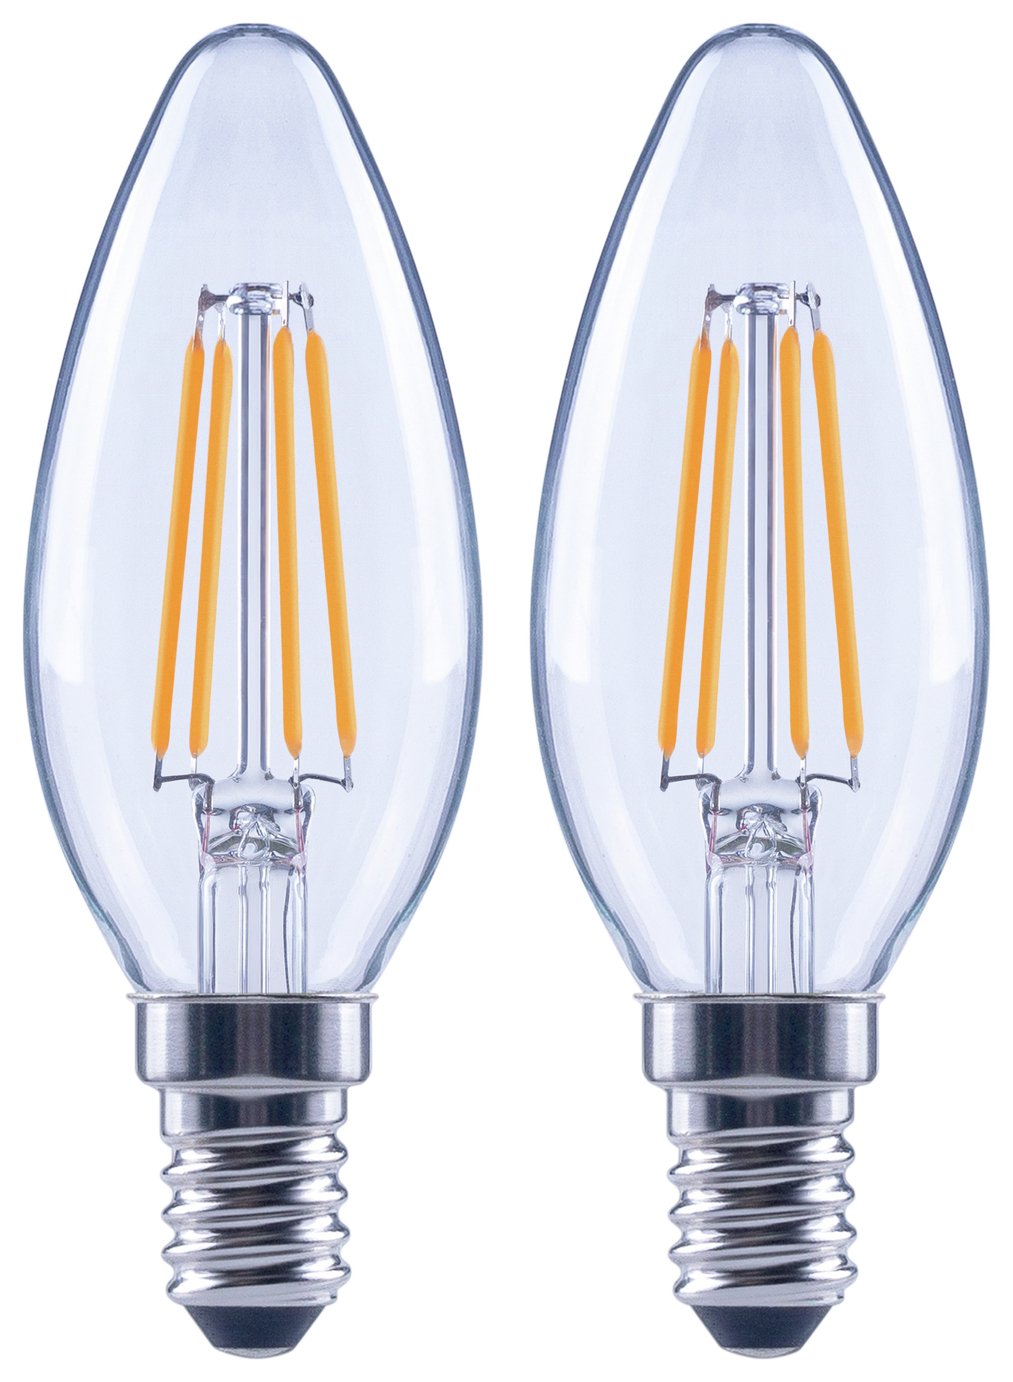 Argos Home 5W LED SES Dimmable Candle Light Bulb - 2 Pack